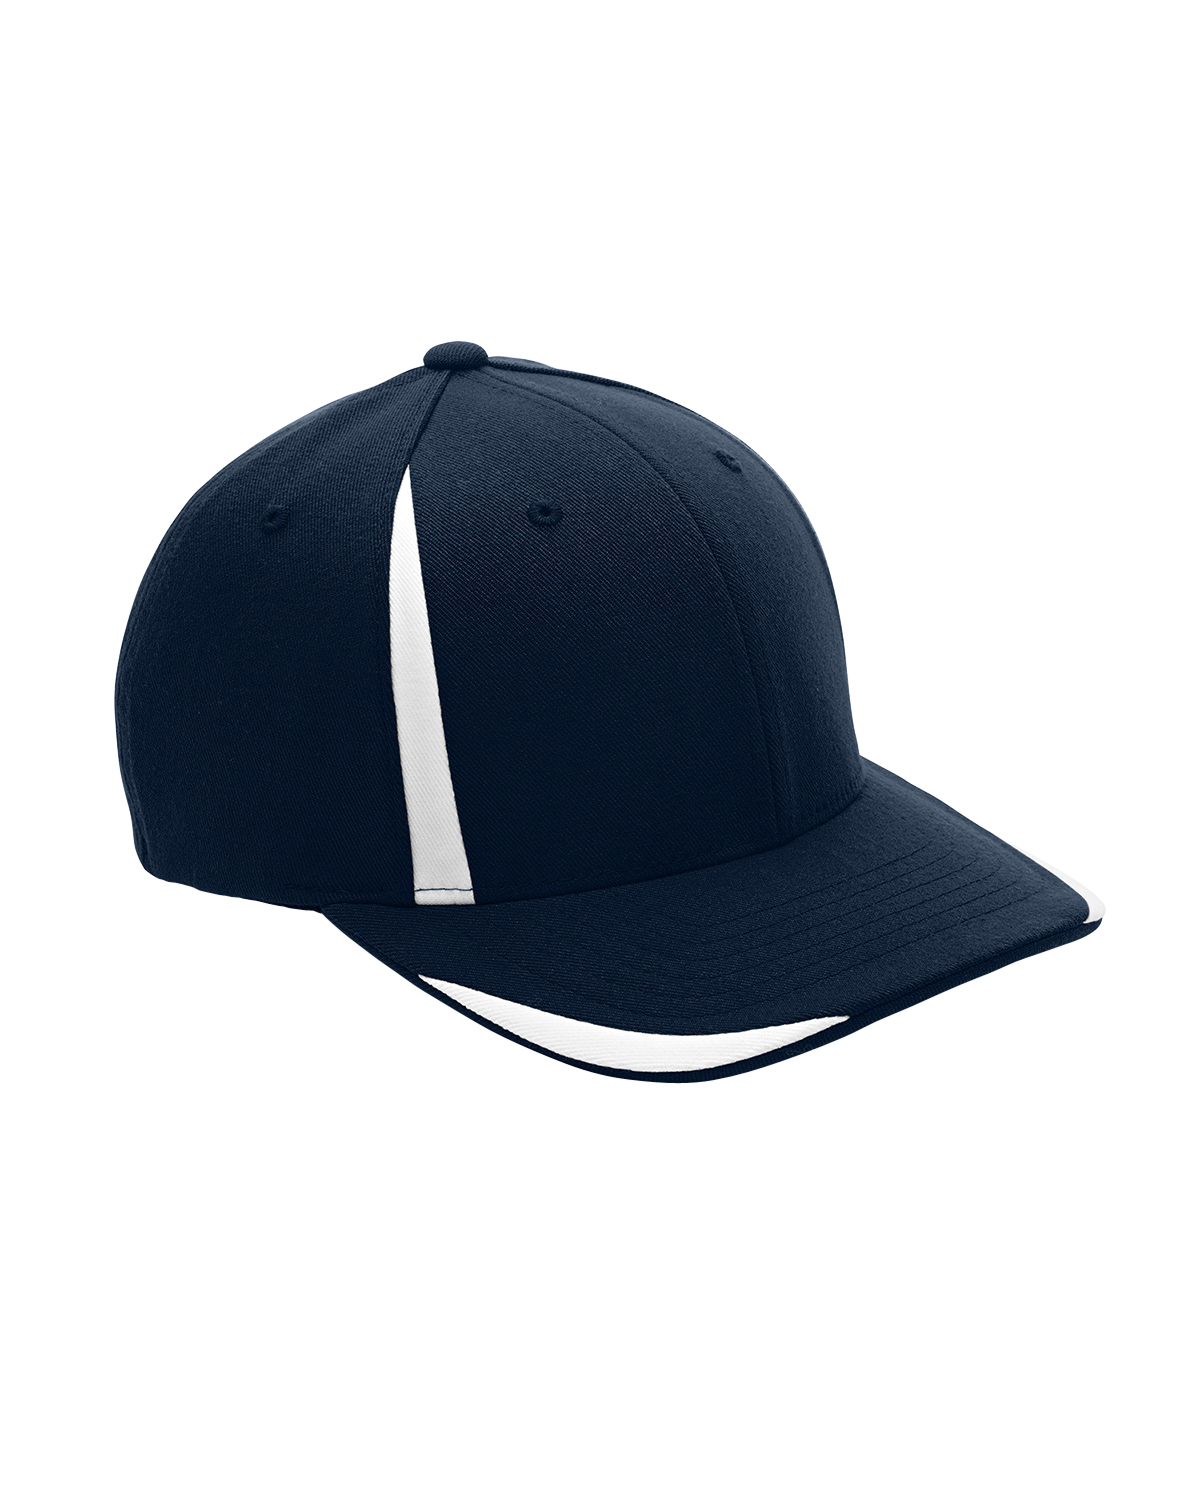 click to view SP DK NAVY/WHT